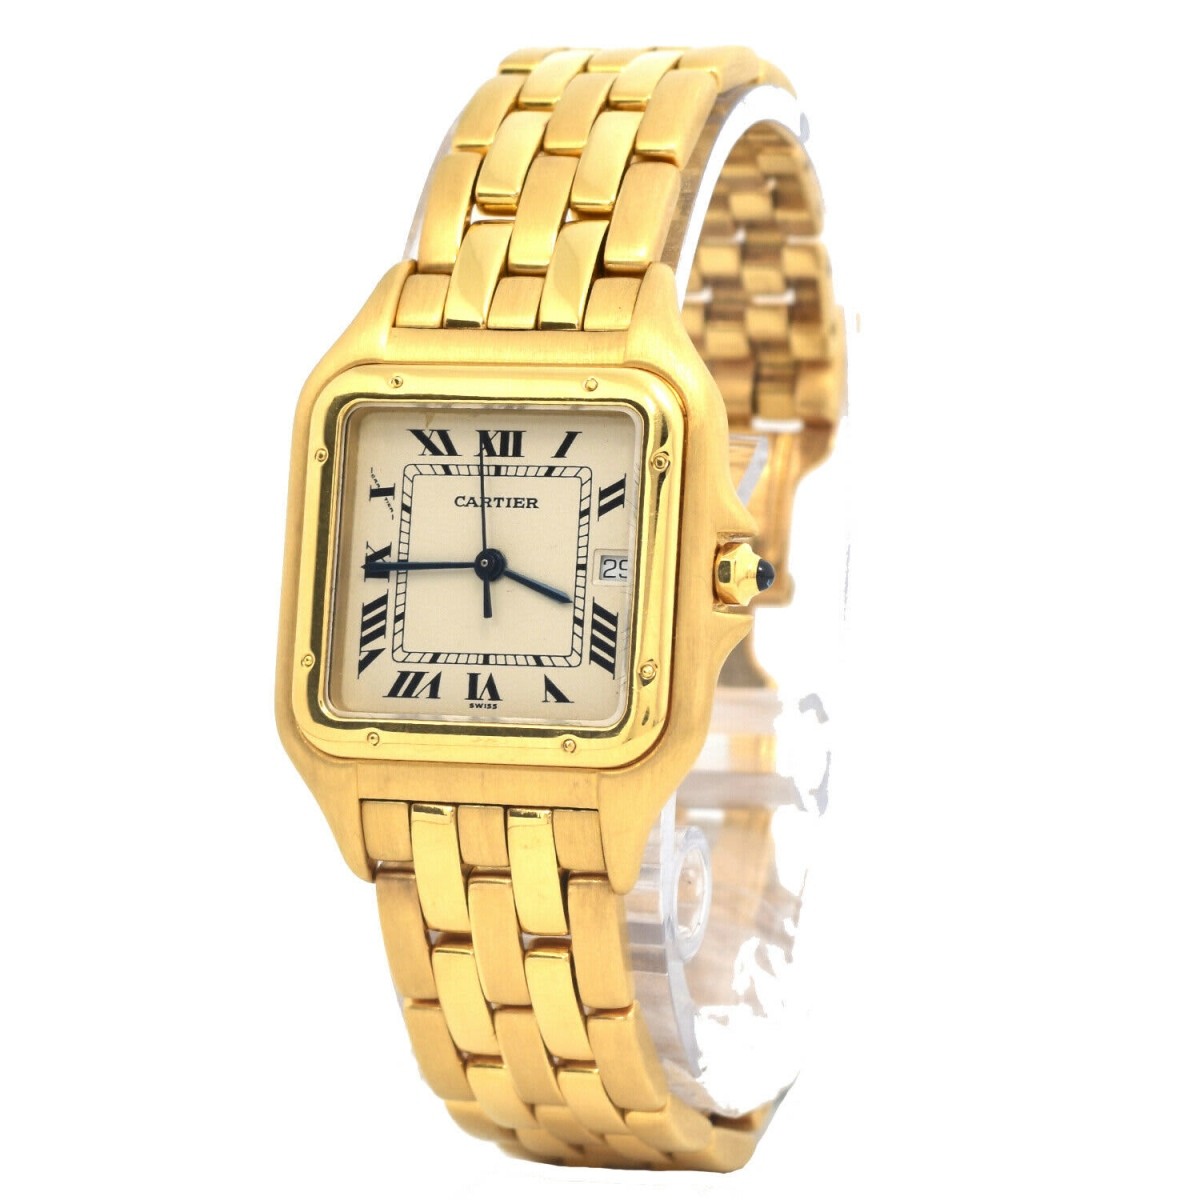 Lady's Cartier Panthere 18K Watch